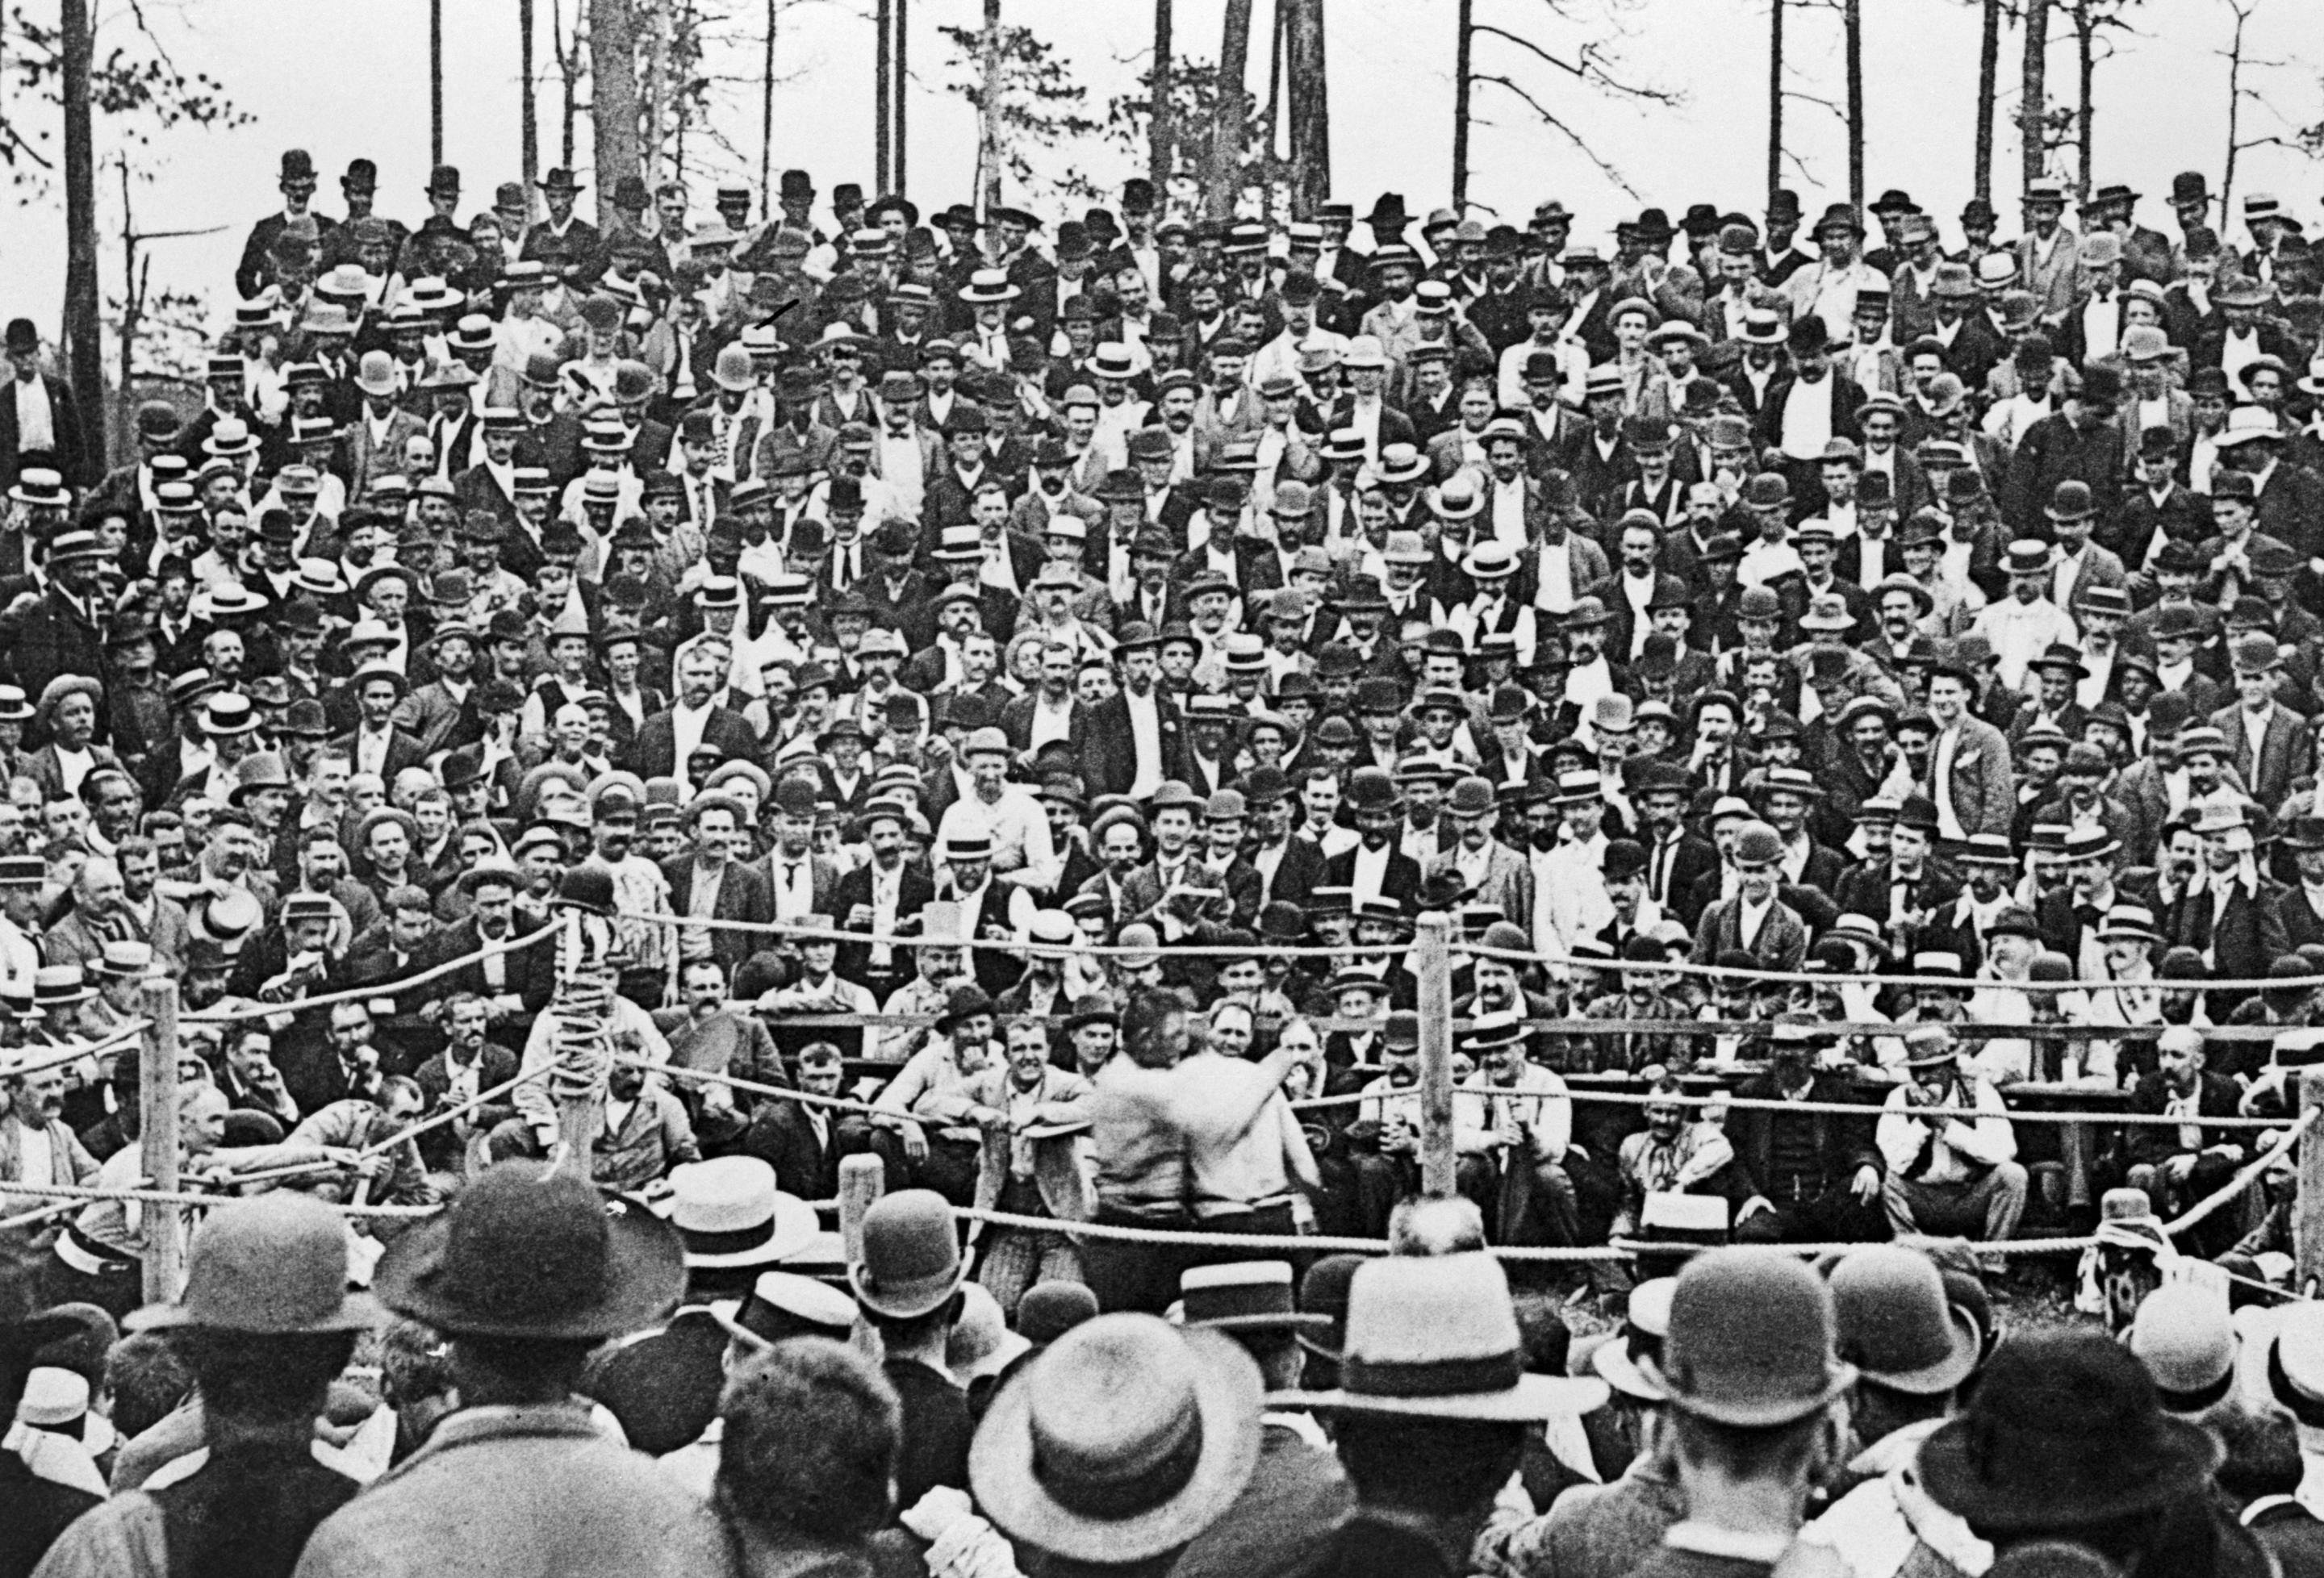 (Original Caption) 7/8/1889-Richburg, Mississippi- Last bareknuckle fight, John L. Sullivan against Jack Kilrain, Richburg, MS, July 8th, 1889. Sullivan won in the 75th round when Kilrain's manager threw in the sponge. This rare picture is the only bare-knuckle bout ever photographed.